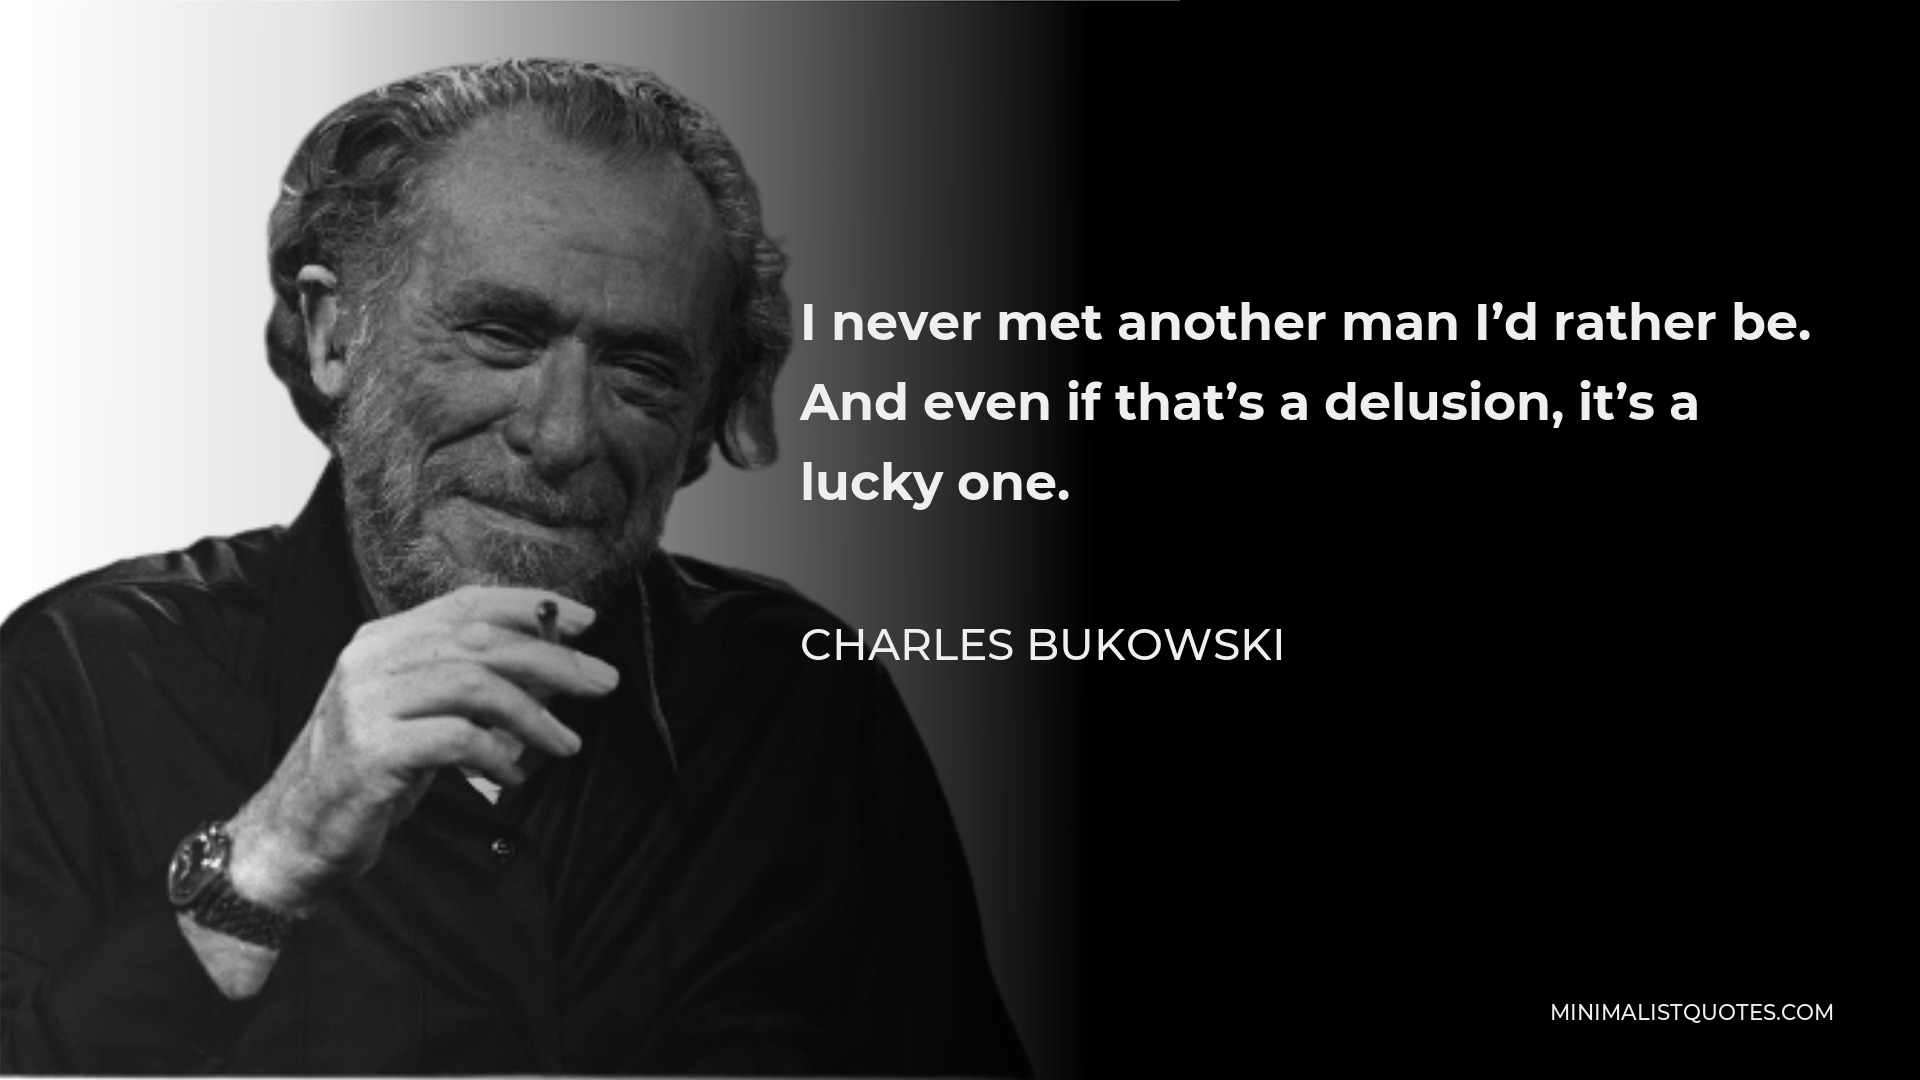 Charles Bukowski Quote - I never met another man I’d rather be. And even if that’s a delusion, it’s a lucky one.